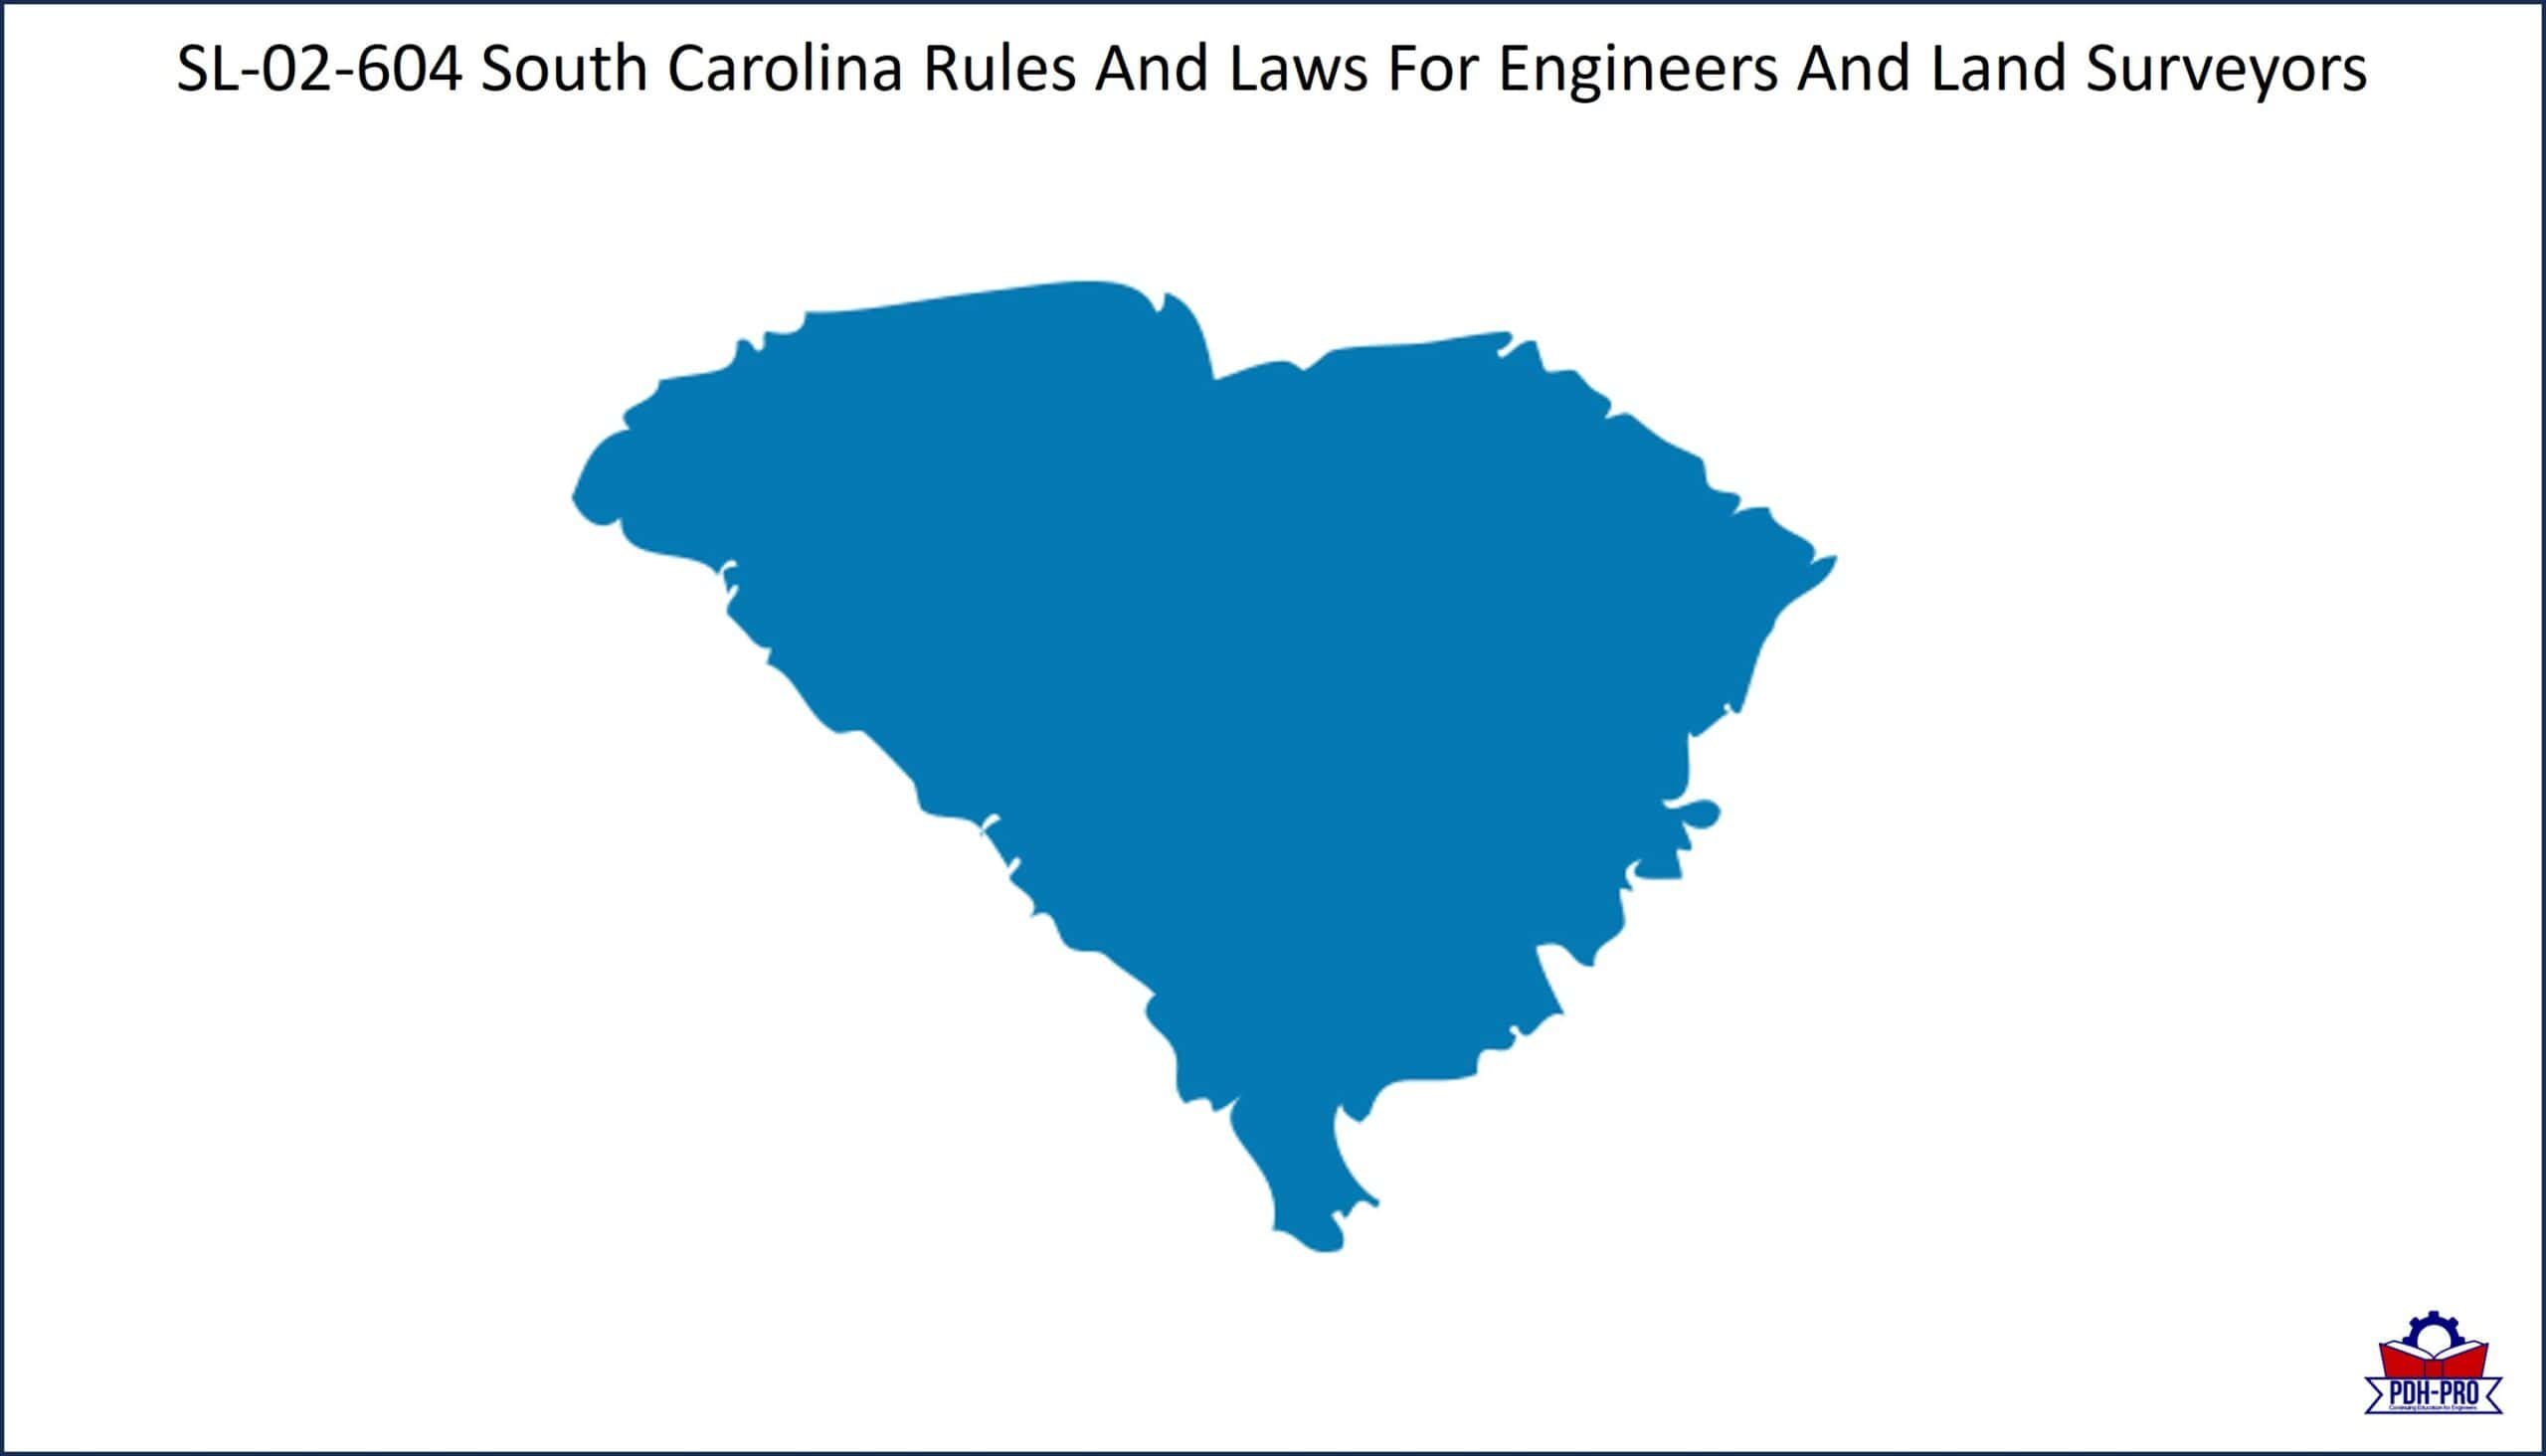 South Carolina Rules And Laws For Engineers And Land Surveyors